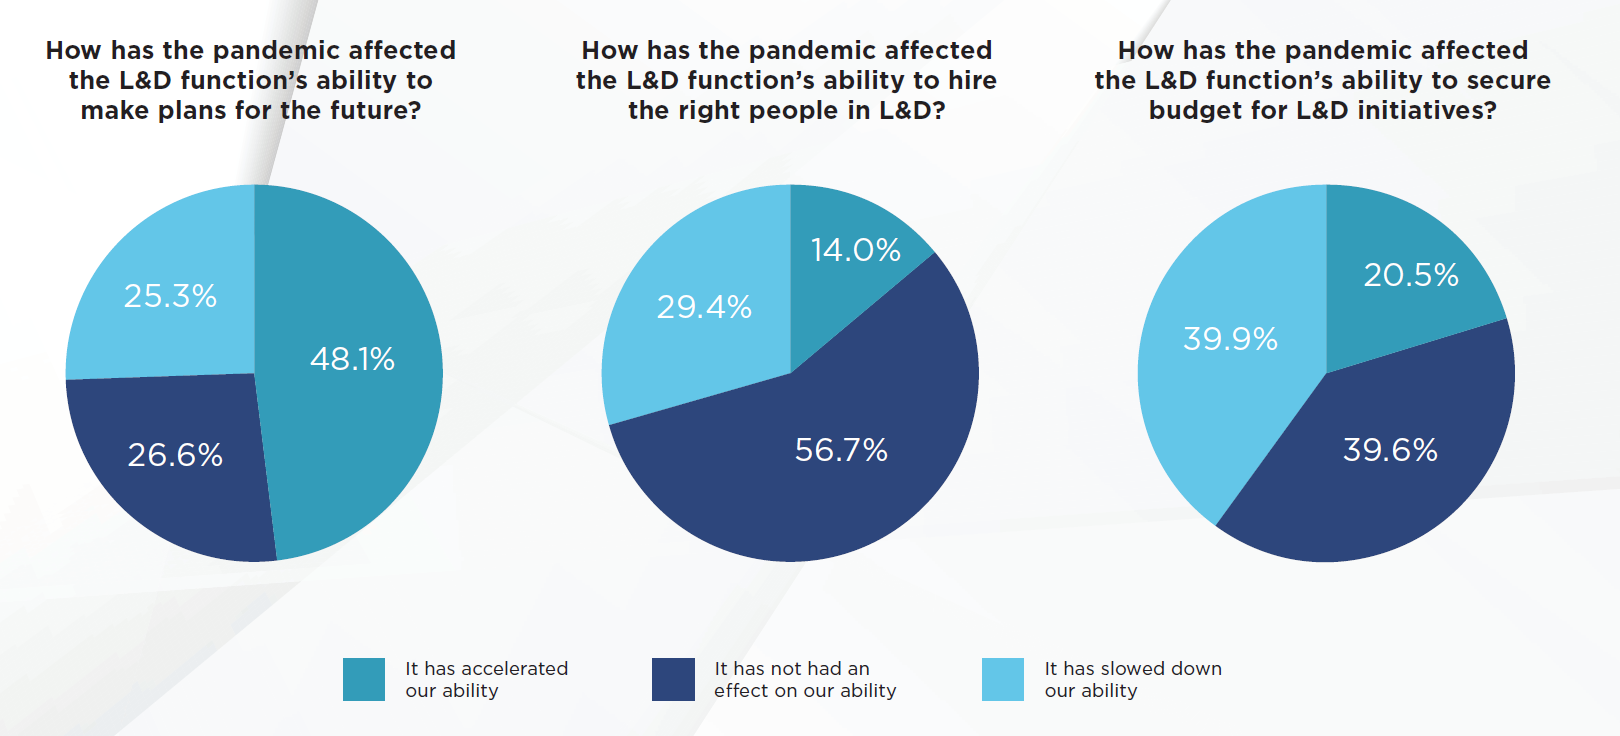 The pandemic has impacted L&D’s ability to make plans, hire and secure budgets